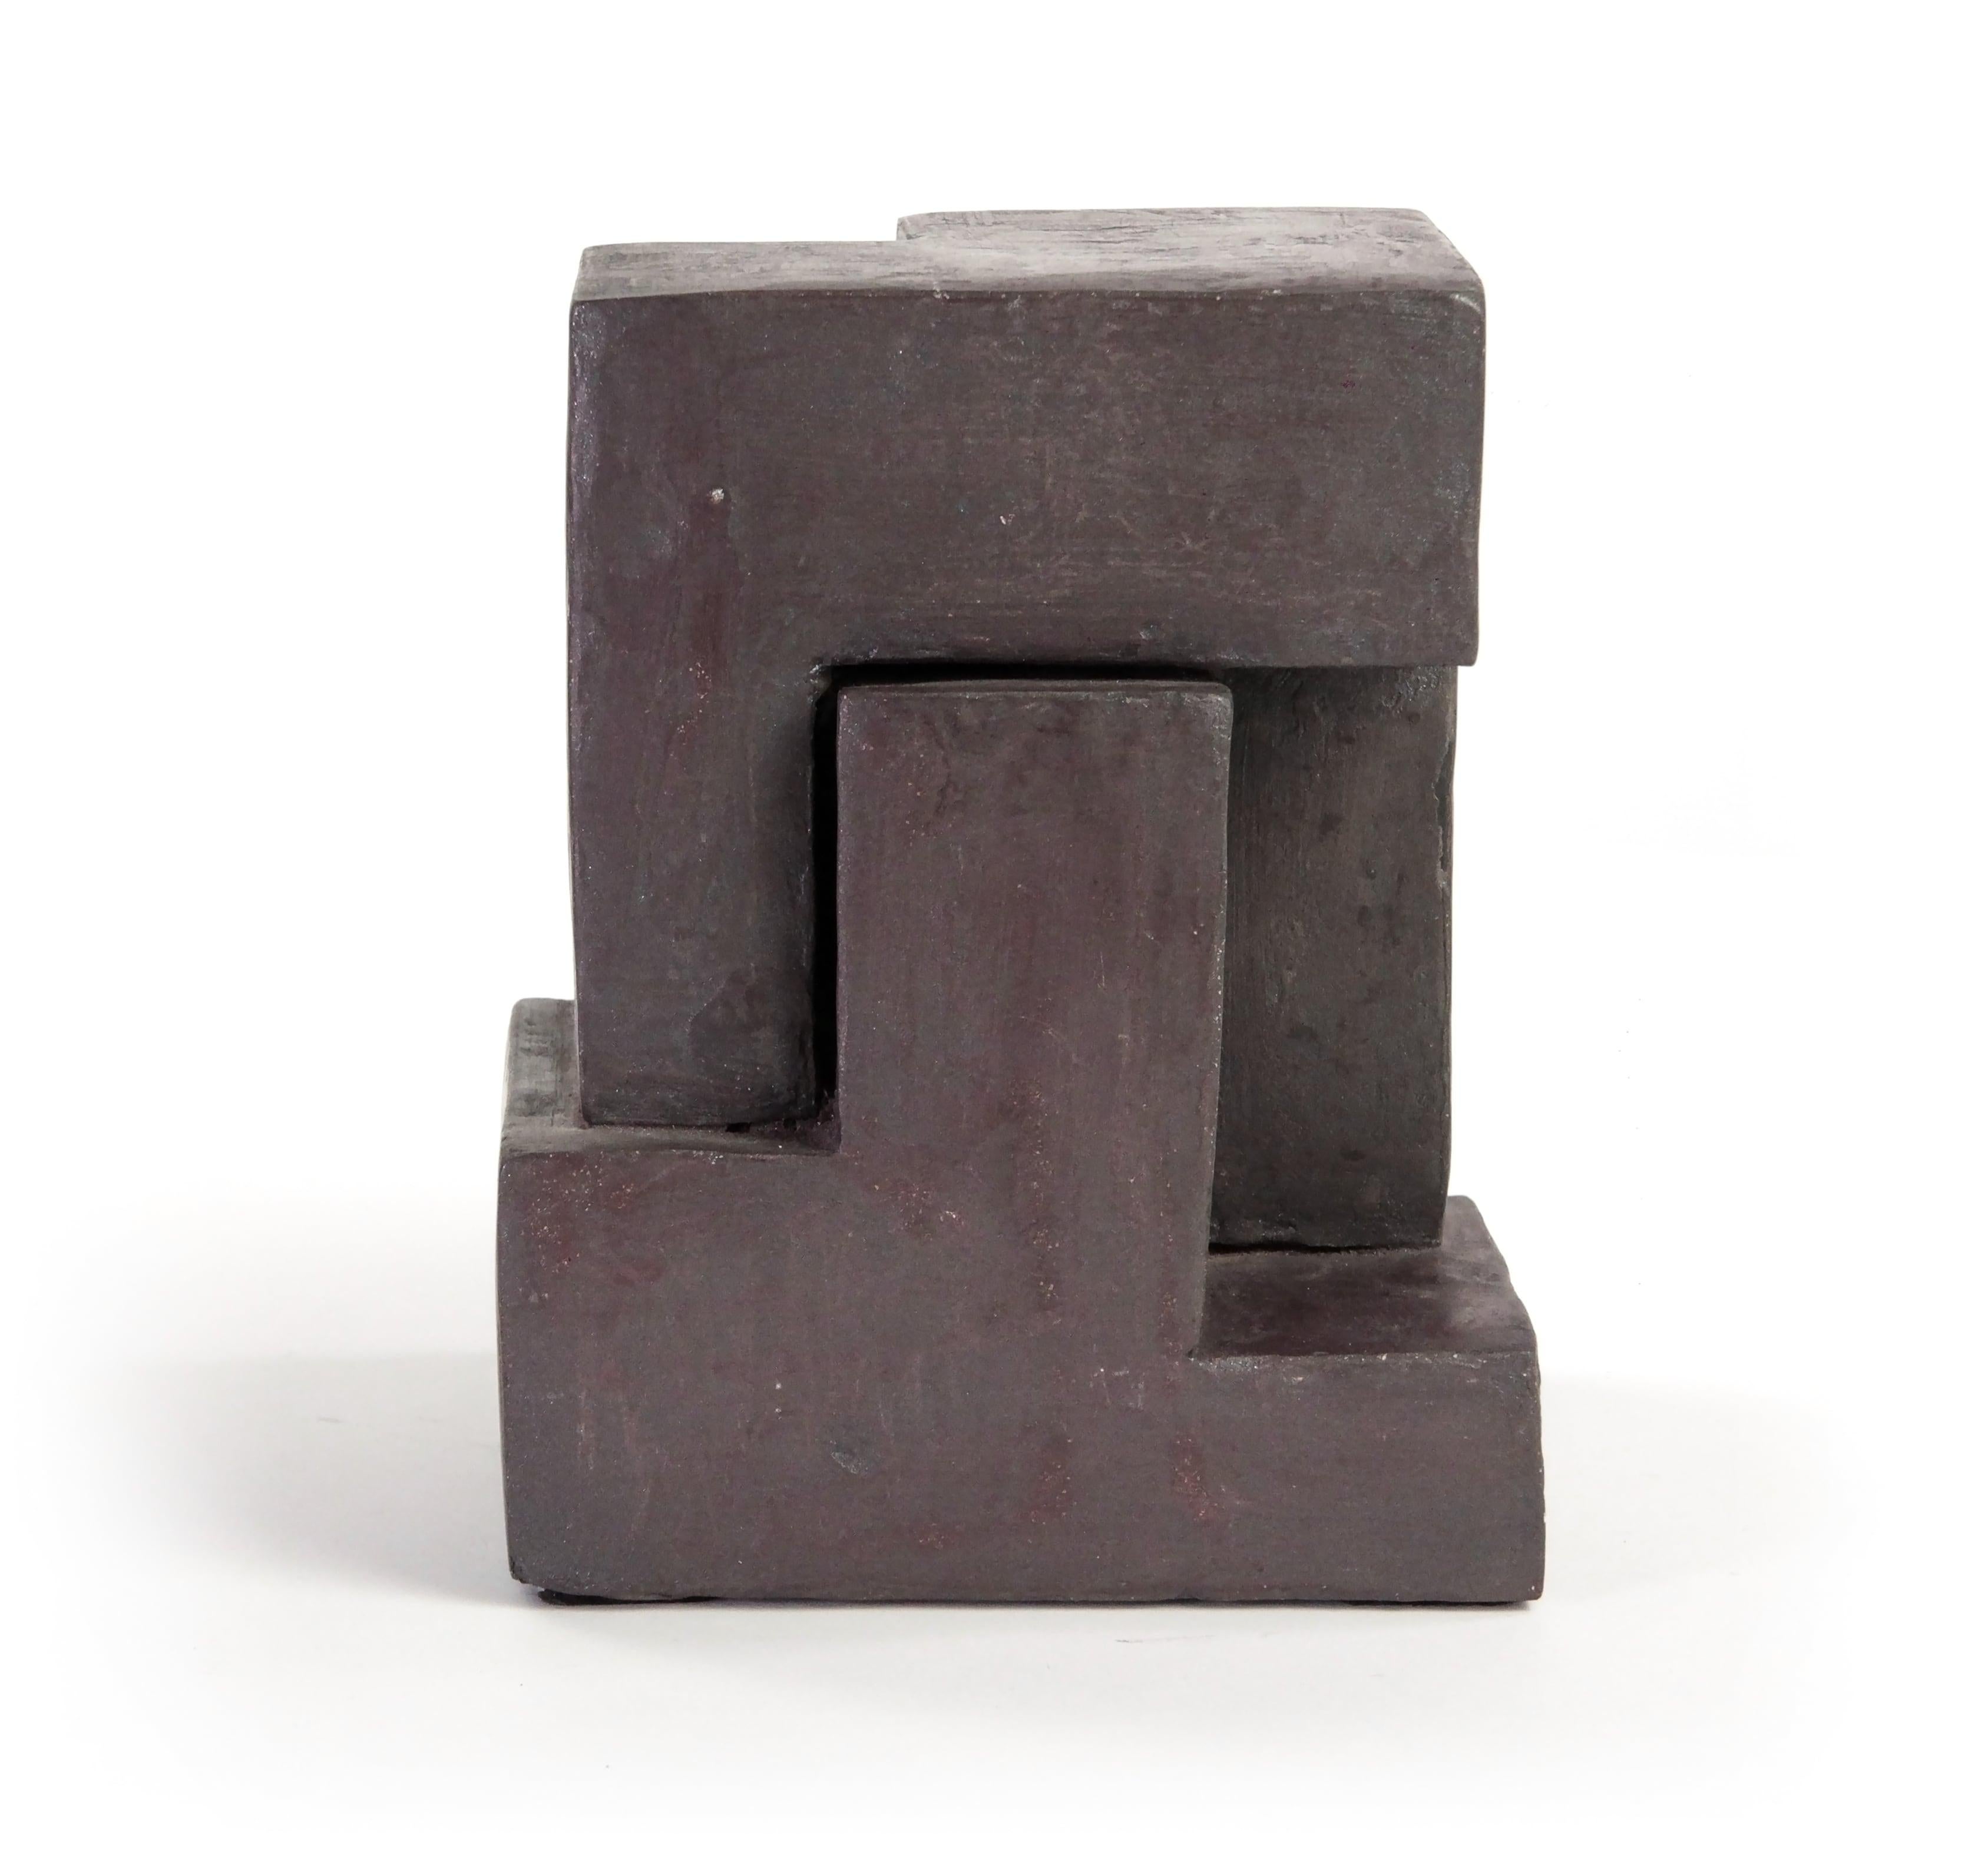 Block IX is a one-off terracotta sculpture by French contemporary artist Delphine Brabant from the 